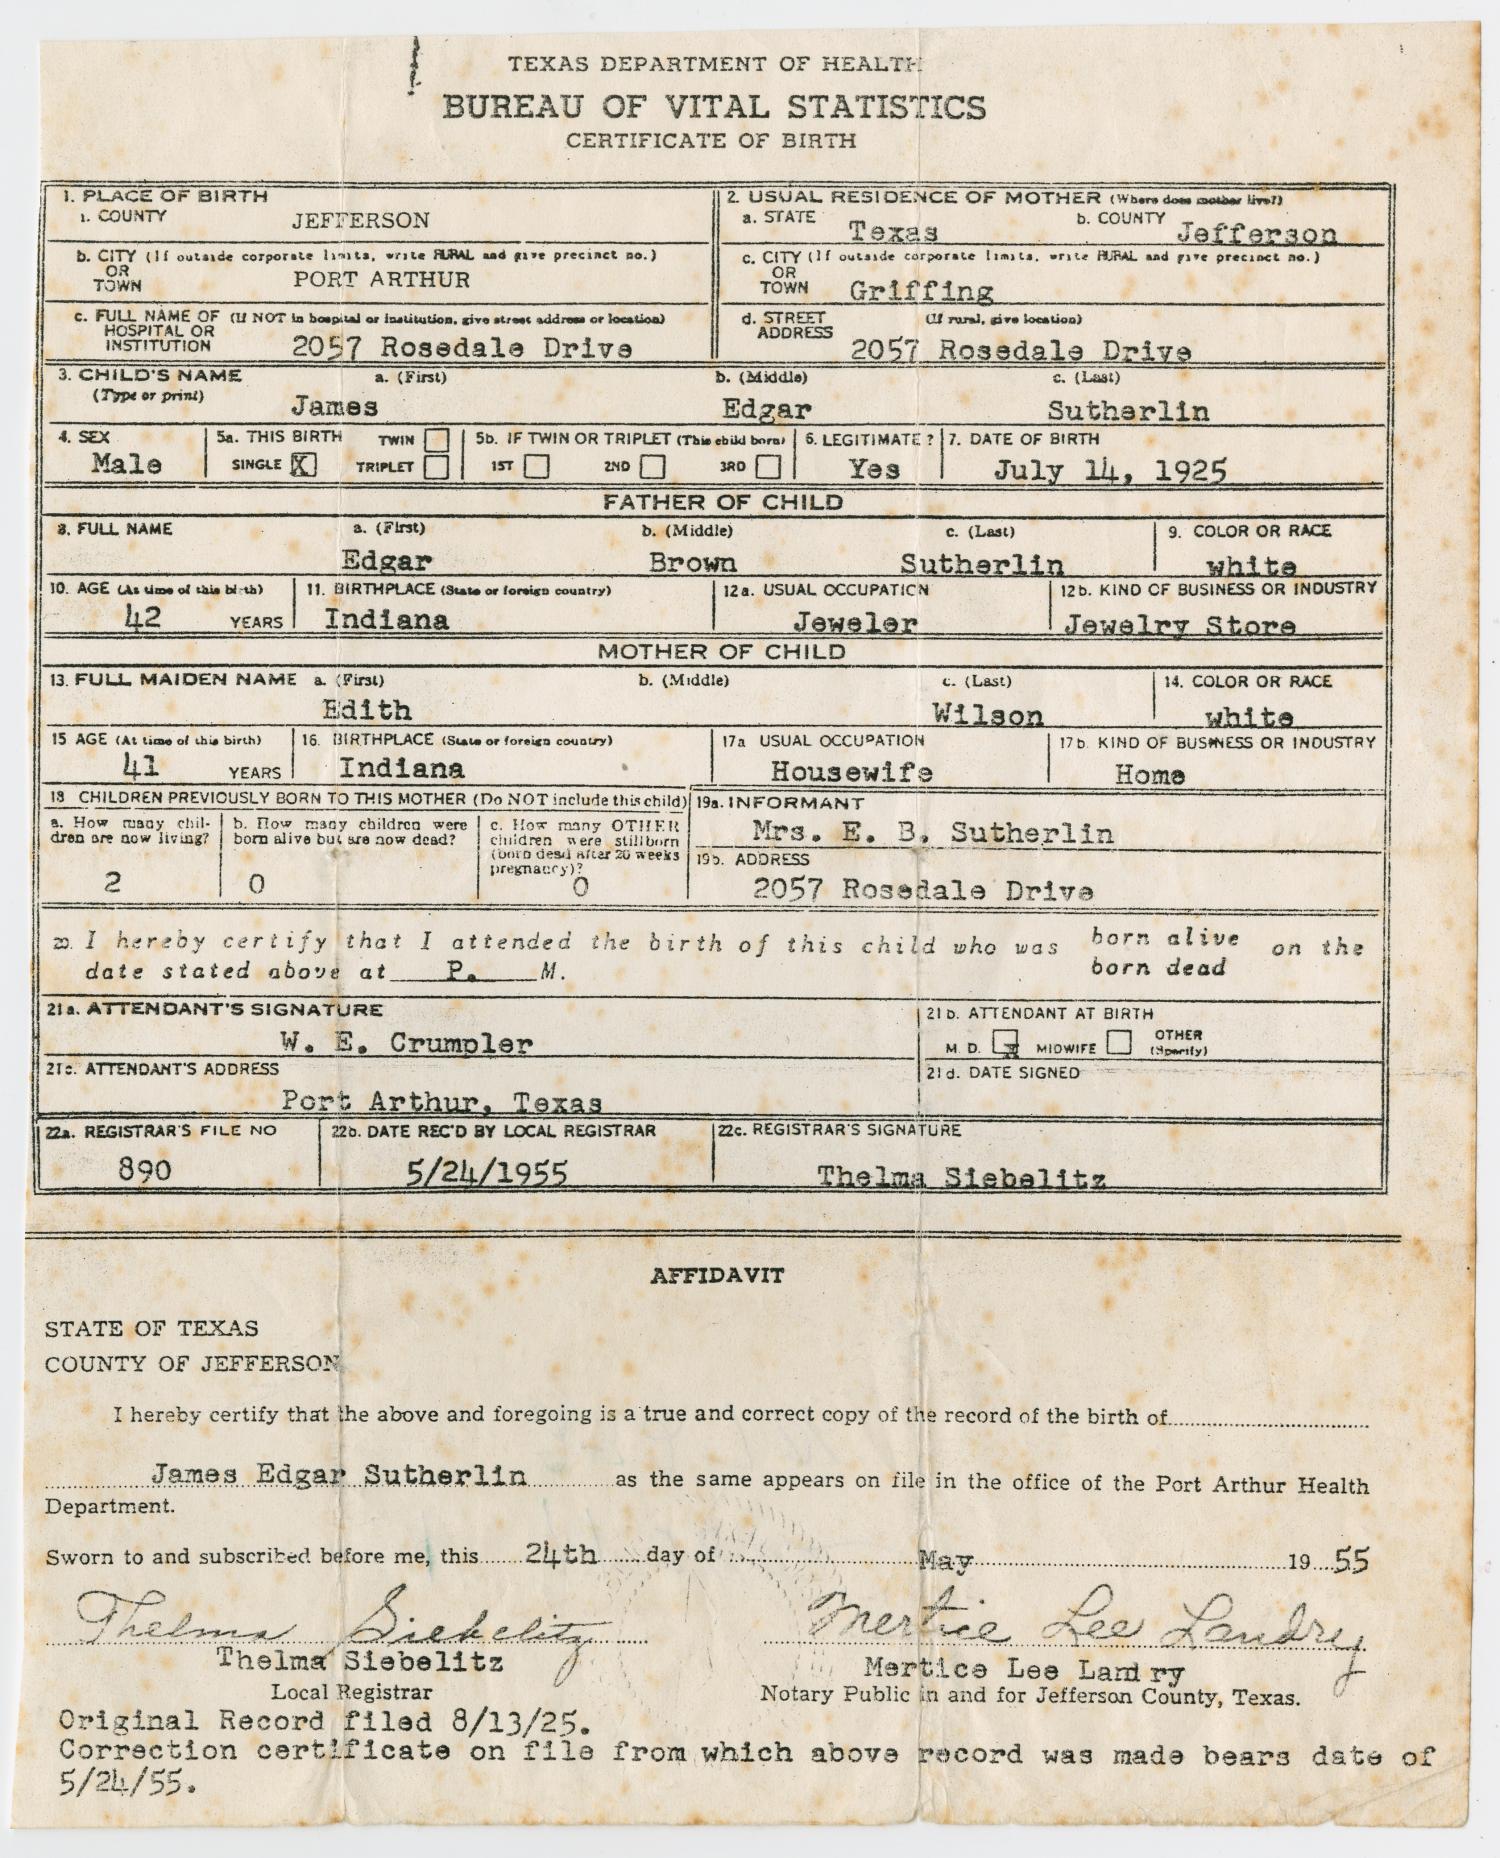 Birth Certificate Of James Edgar Sutherlin Page 1 Of 2 The Portal To Texas History